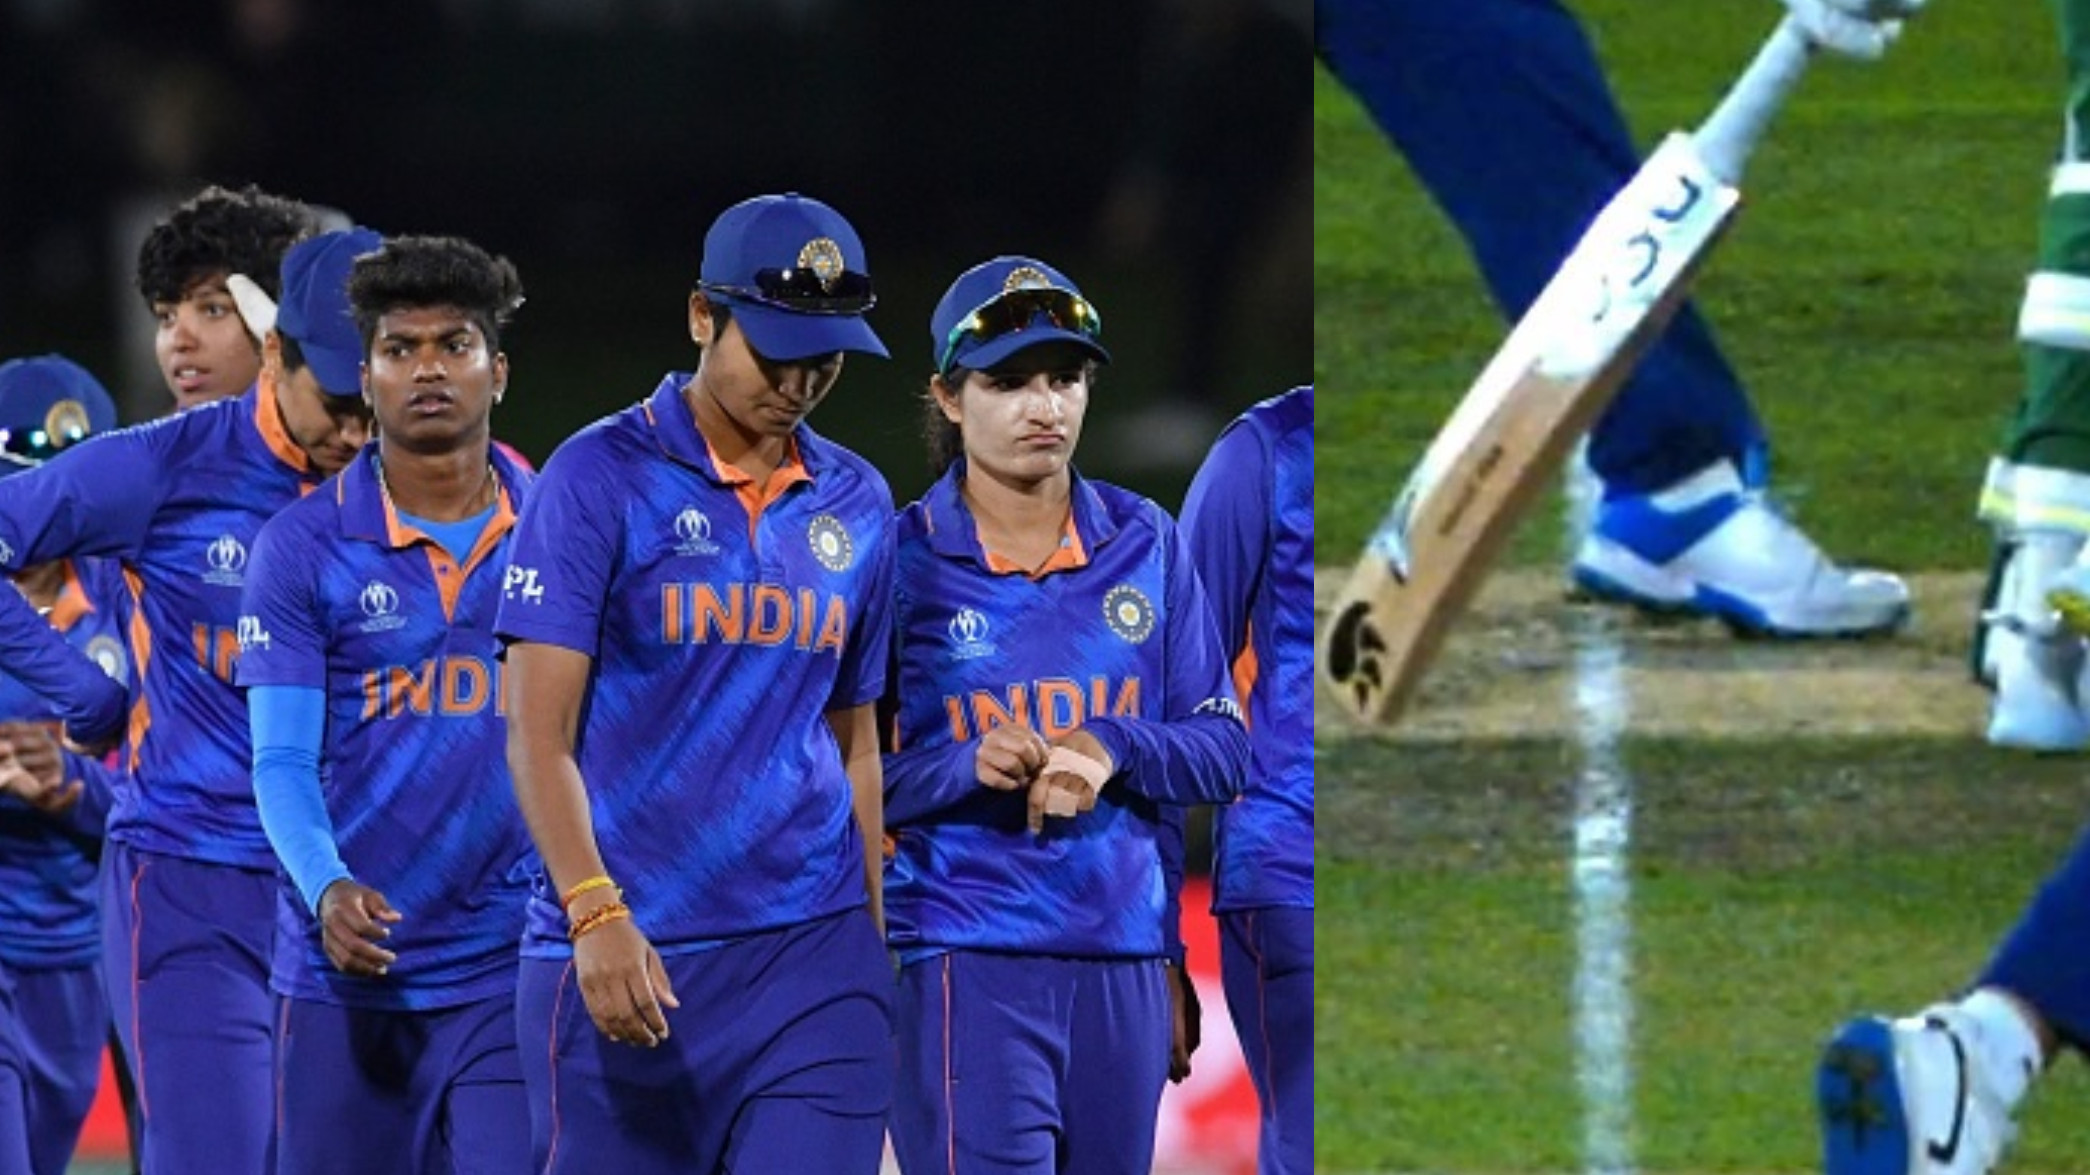 CWC 2022: Cricket fraternity reacts as unfortunate no-ball knocks India out of Women’s World Cup; lose to South Africa